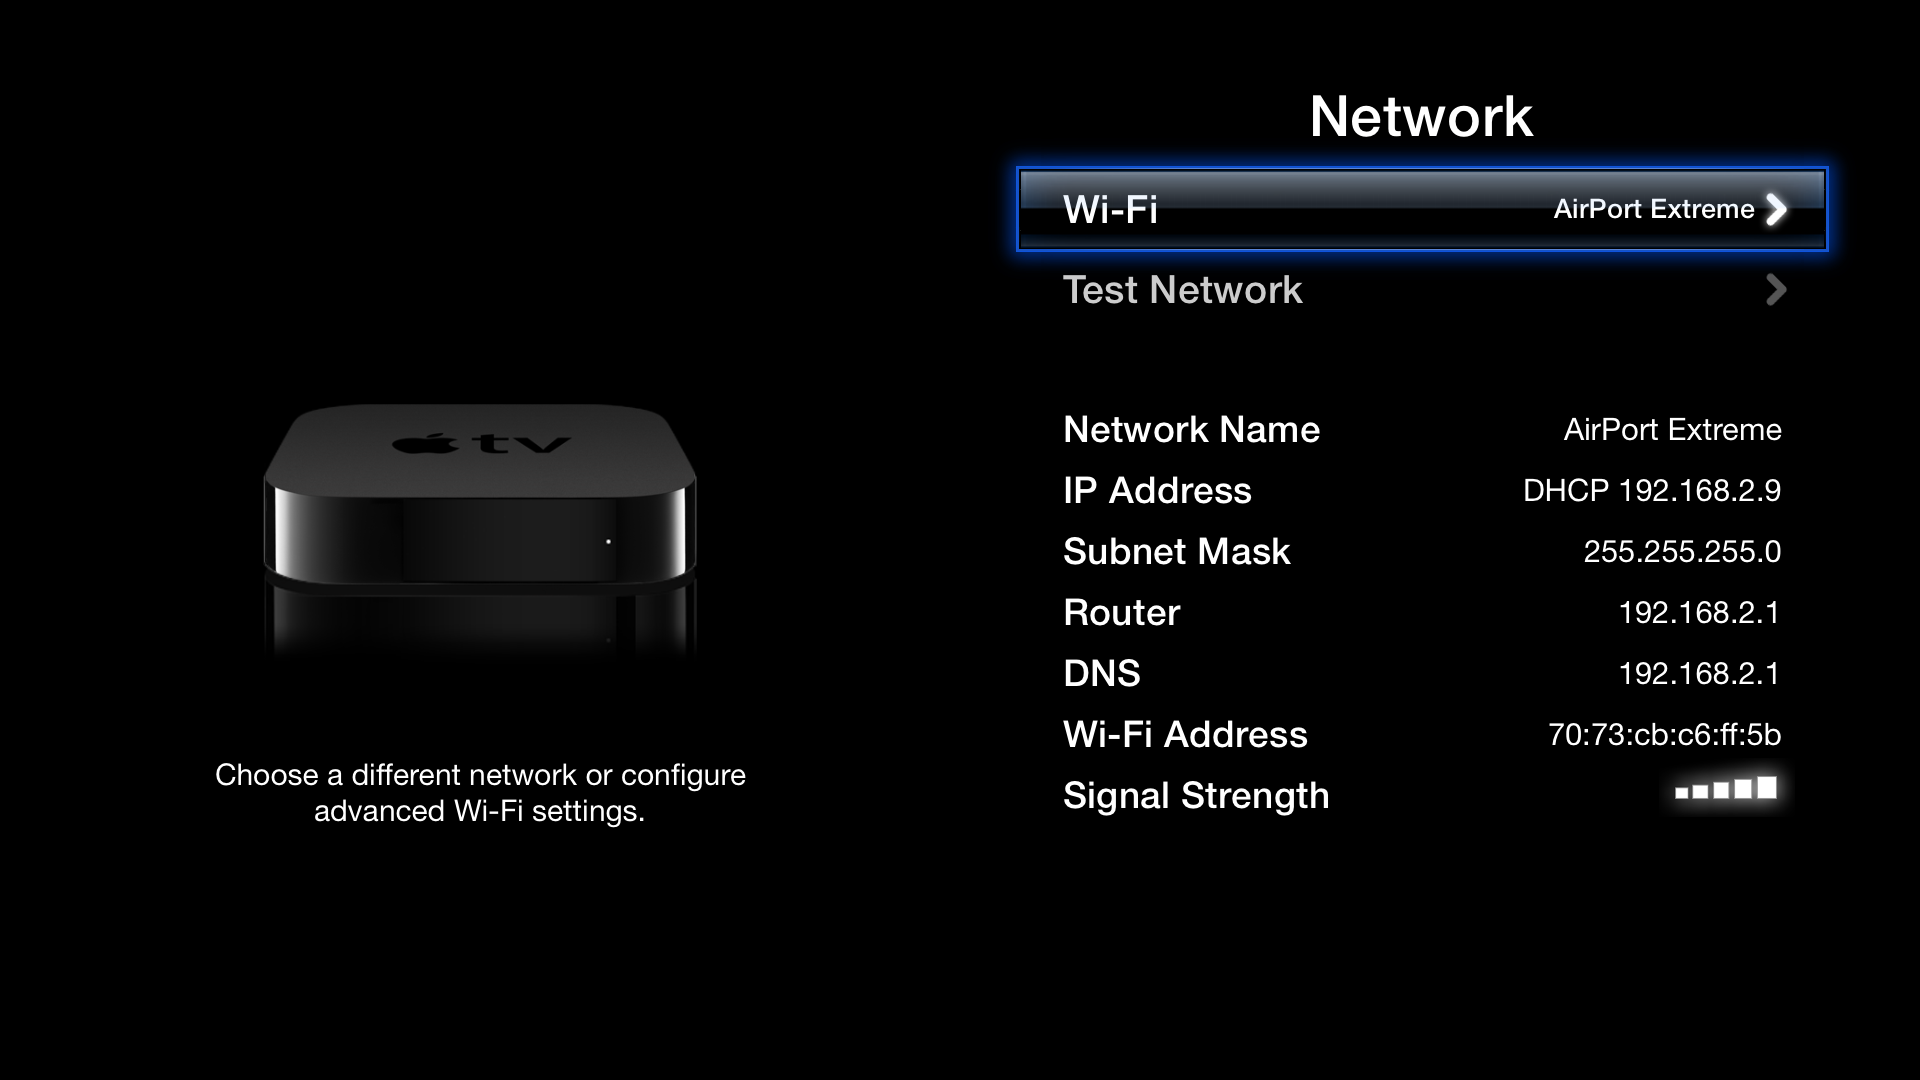 Ensure that your Apple TV is connected to a stable and high-speed internet connection.
Verify that other devices connected to the same network are not experiencing any connectivity issues.